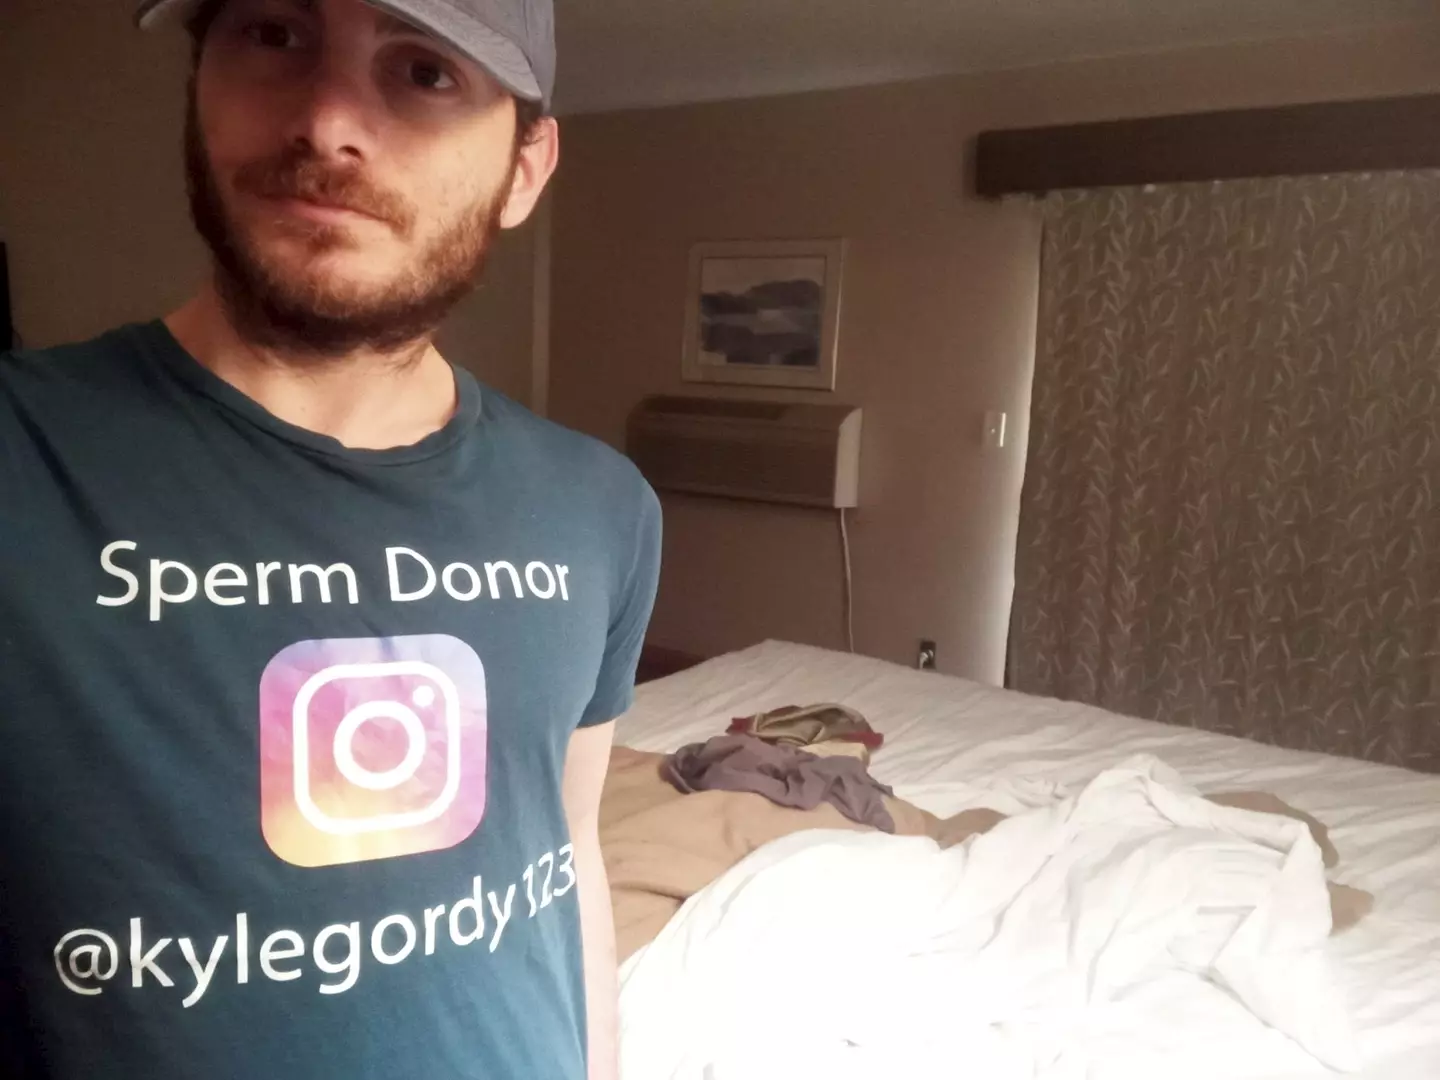 Kyle has donated his sperm to over 150 families around the world.